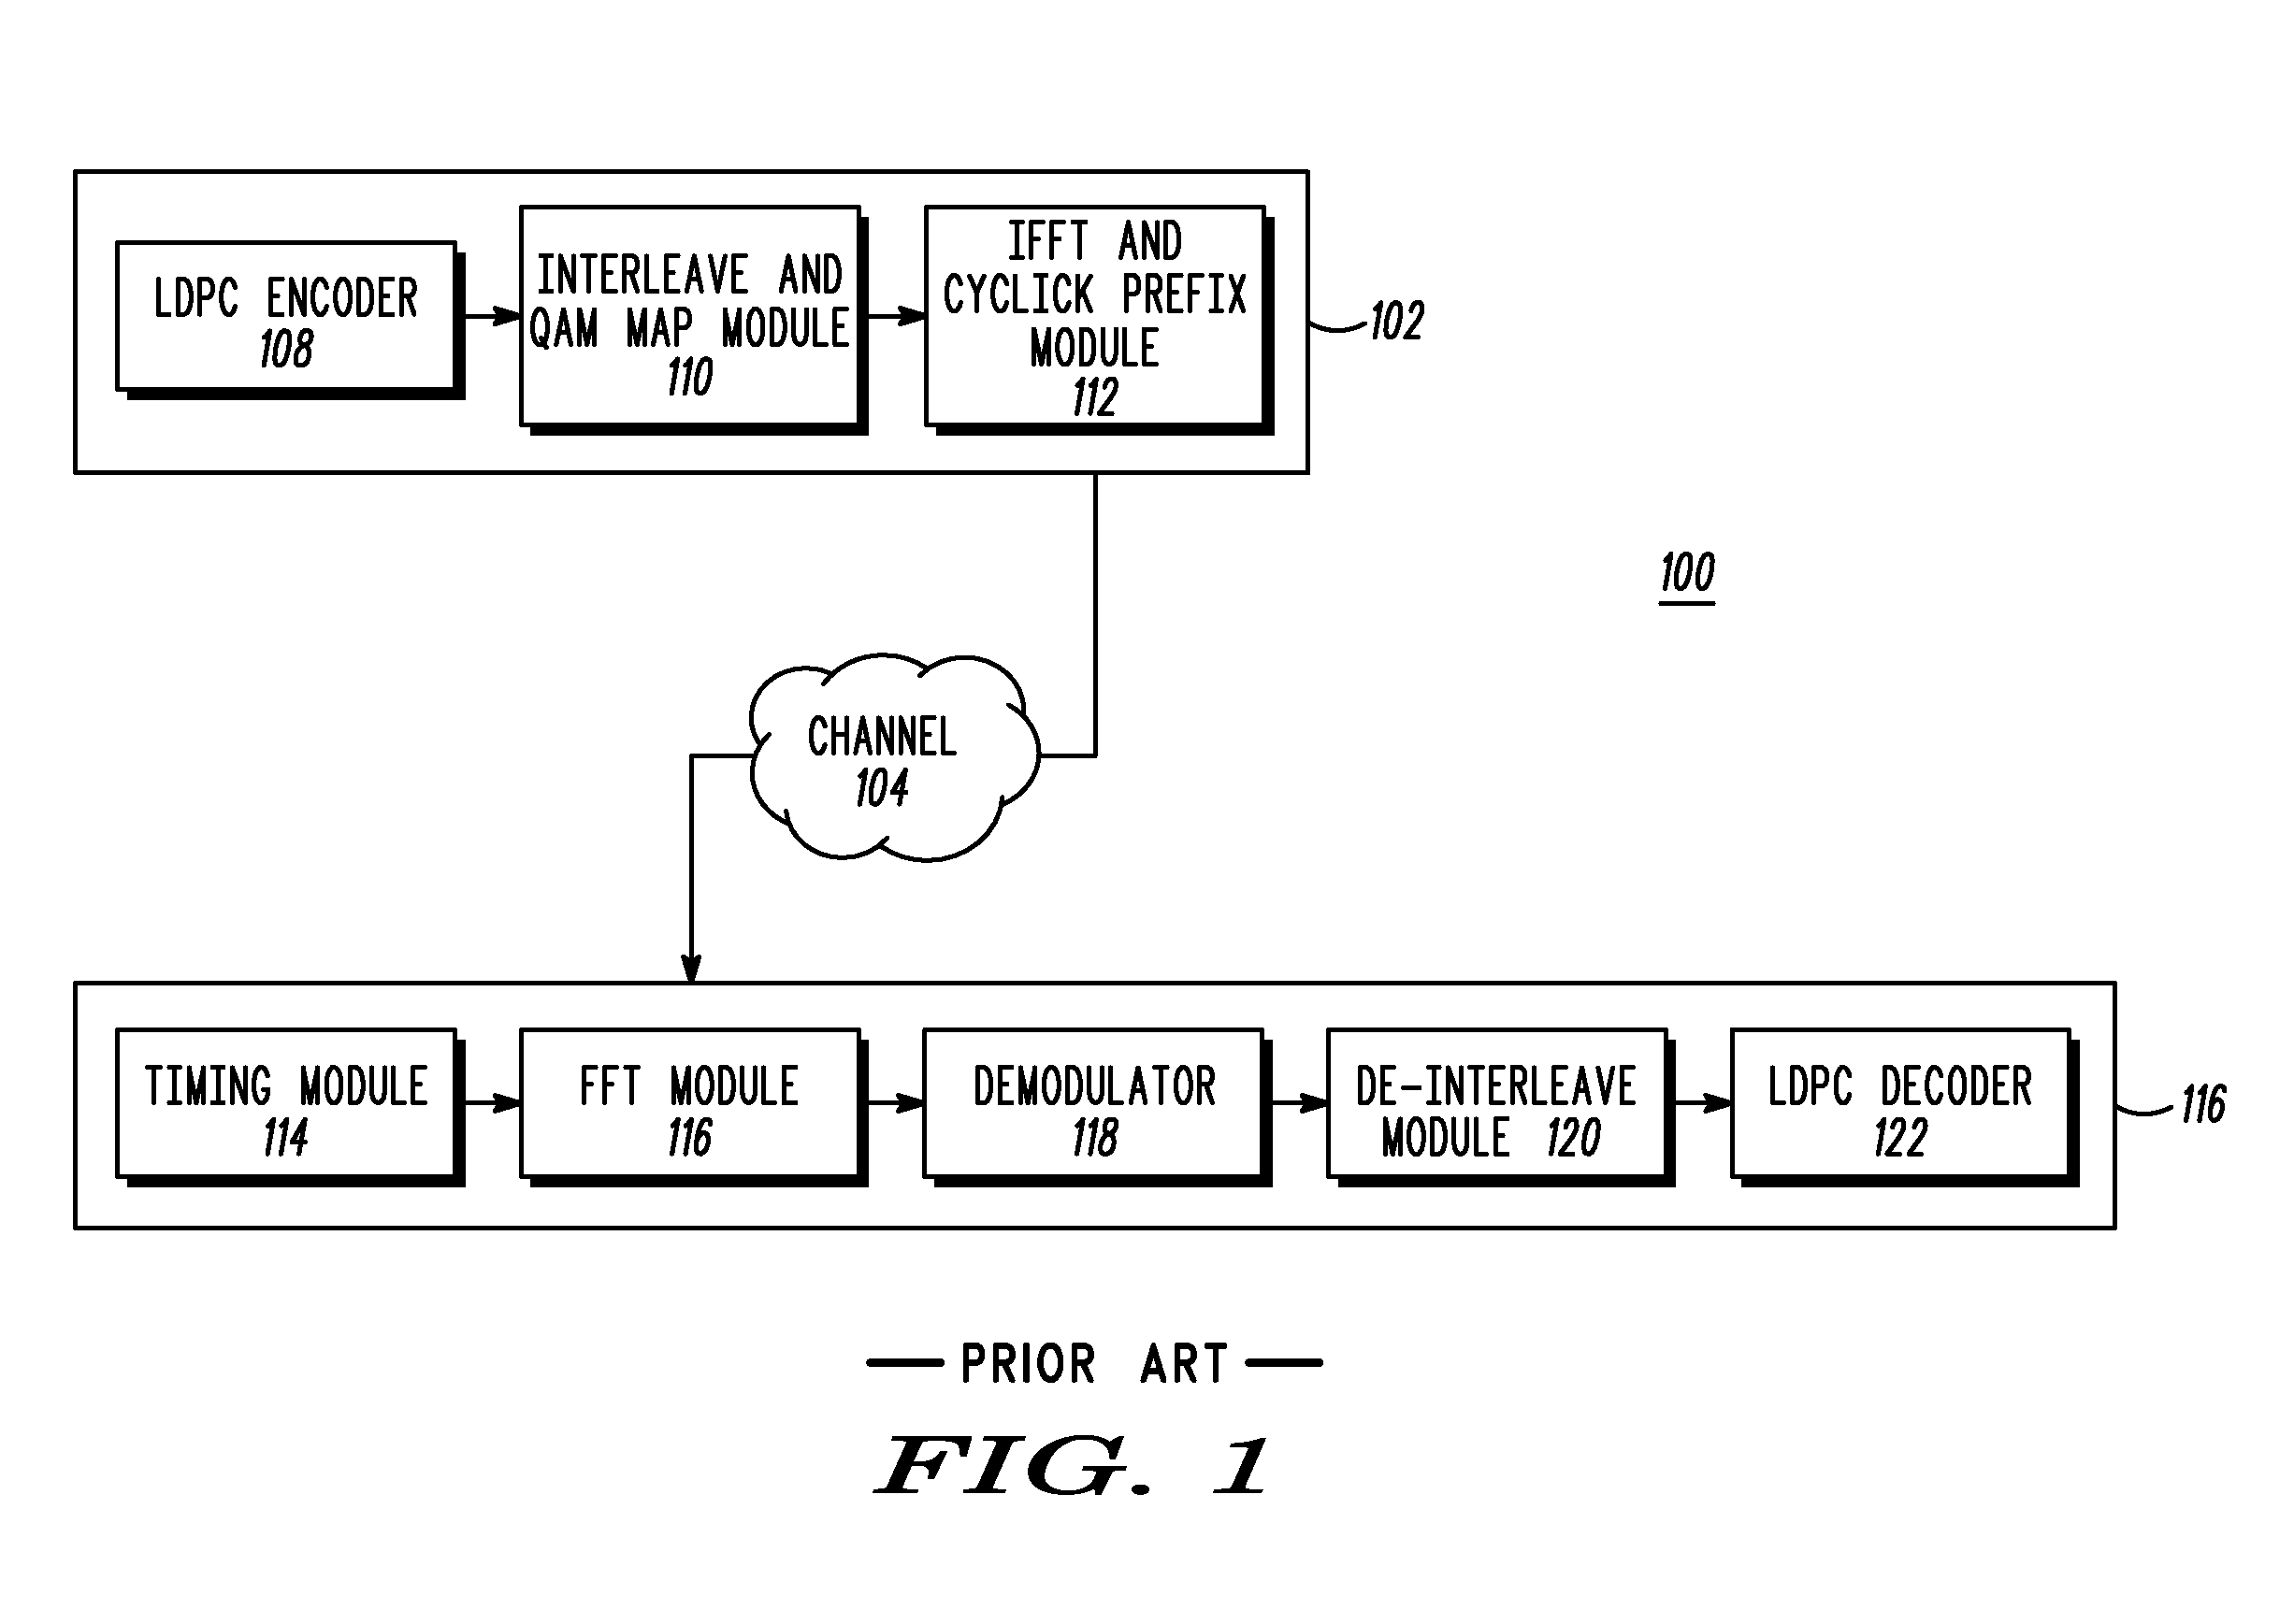 Turbo Interference Suppression in Communication Systems